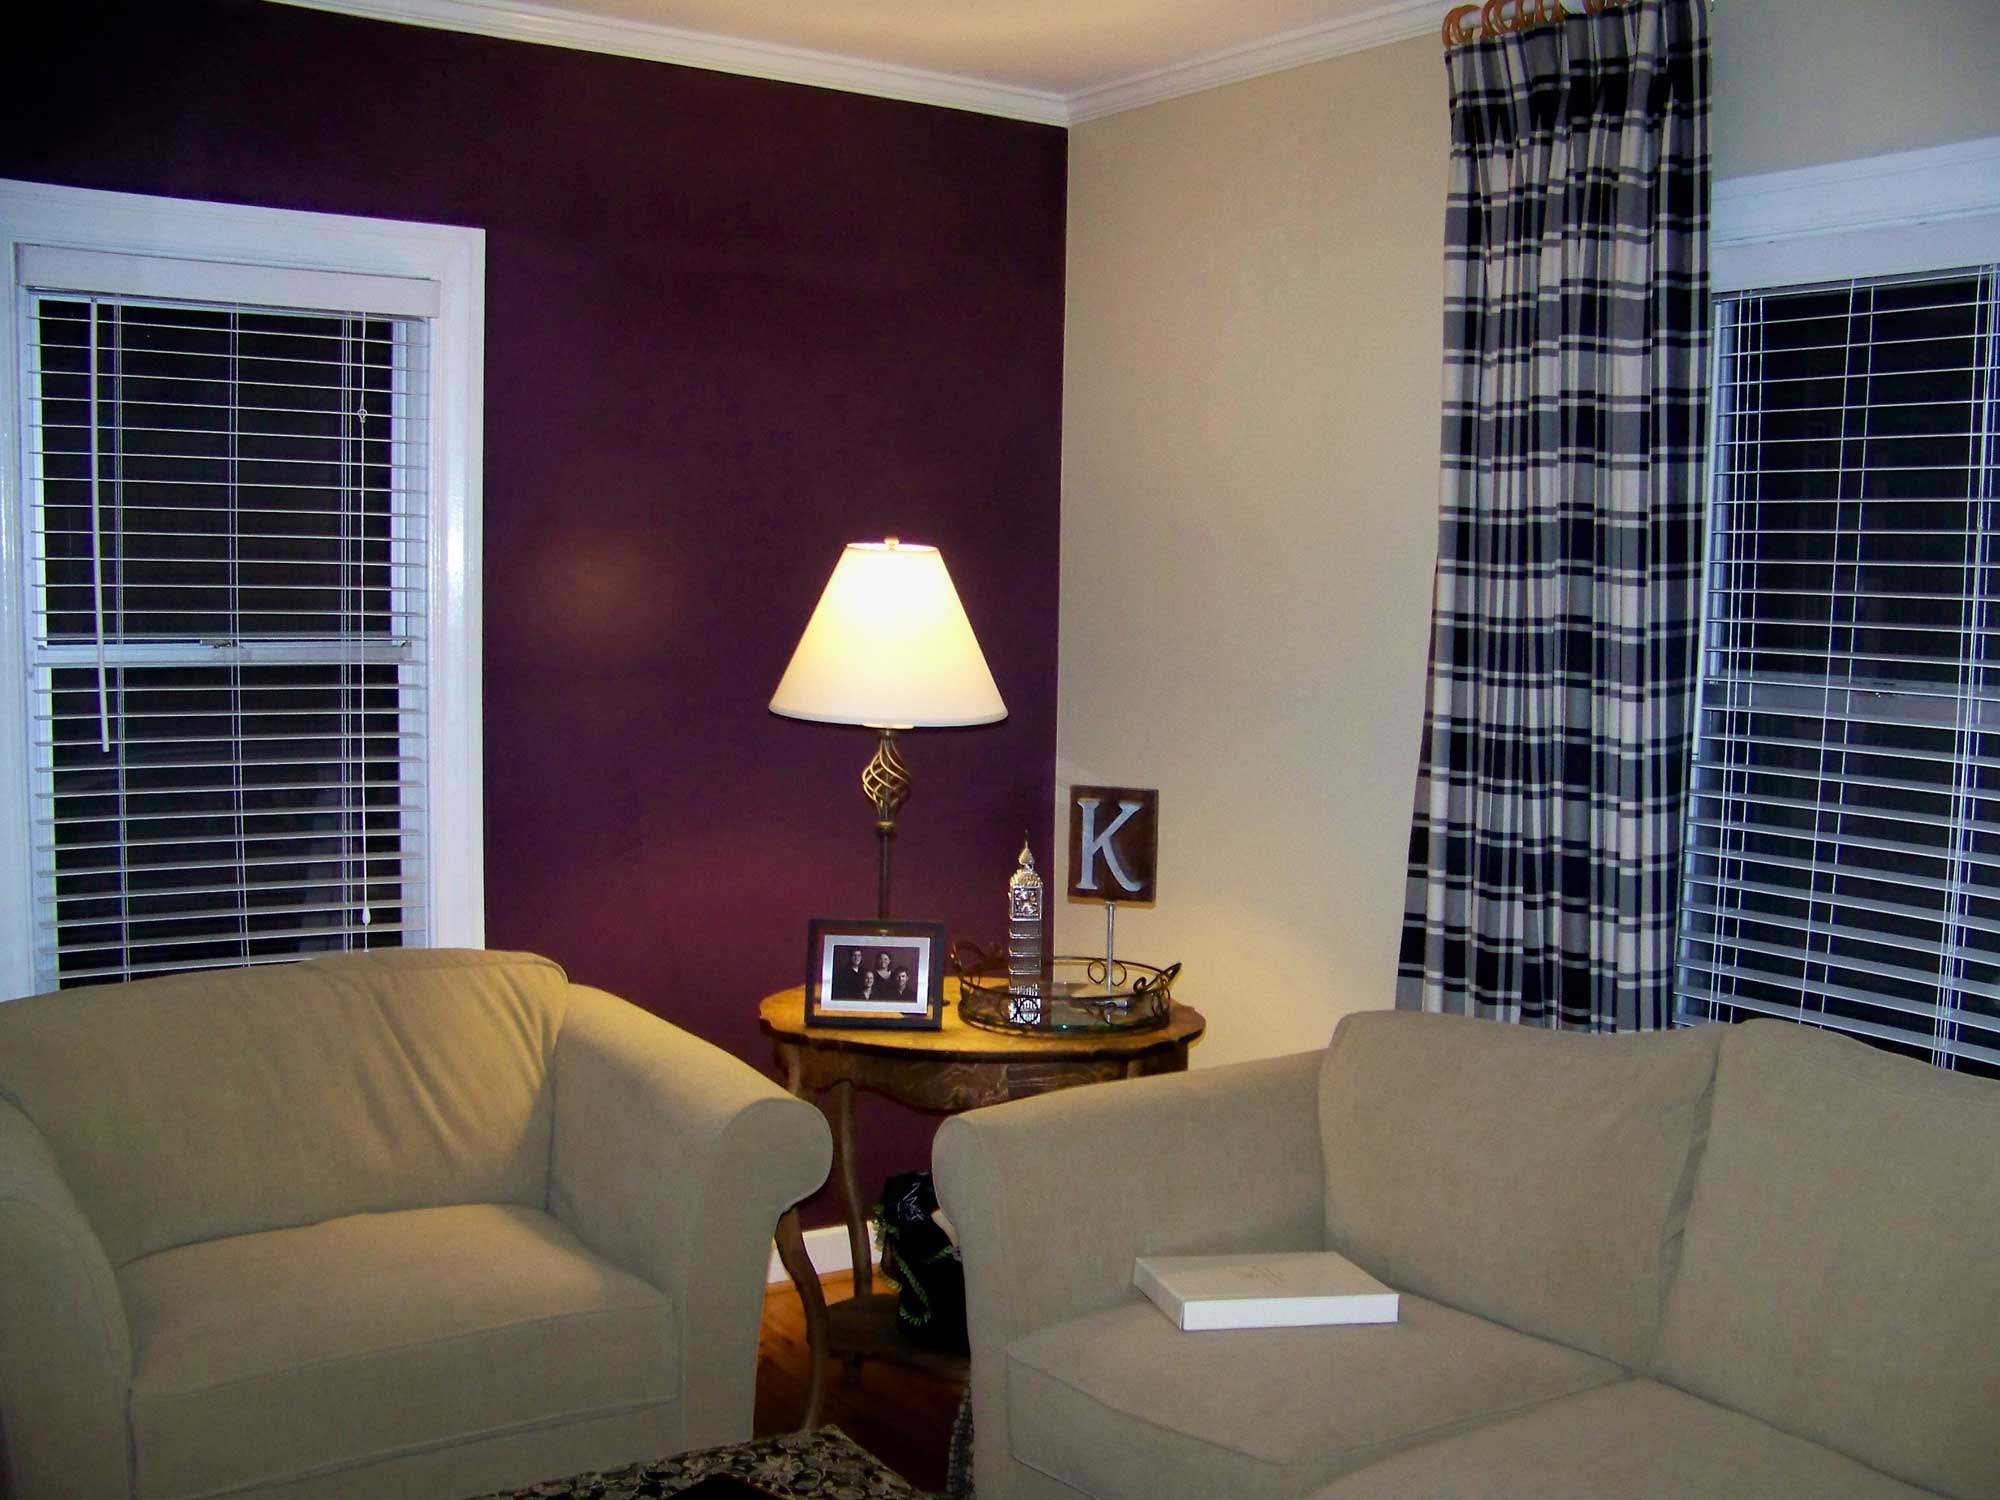 Purple Living Ideas Inspiring Purple Living Room Paint Ideas With White Windows And Sliding Curtains Completed With Table Lighting On Round Nightstand And Furnished With Chair Living Room Modern Living Room Paint Ideas With Color Combination